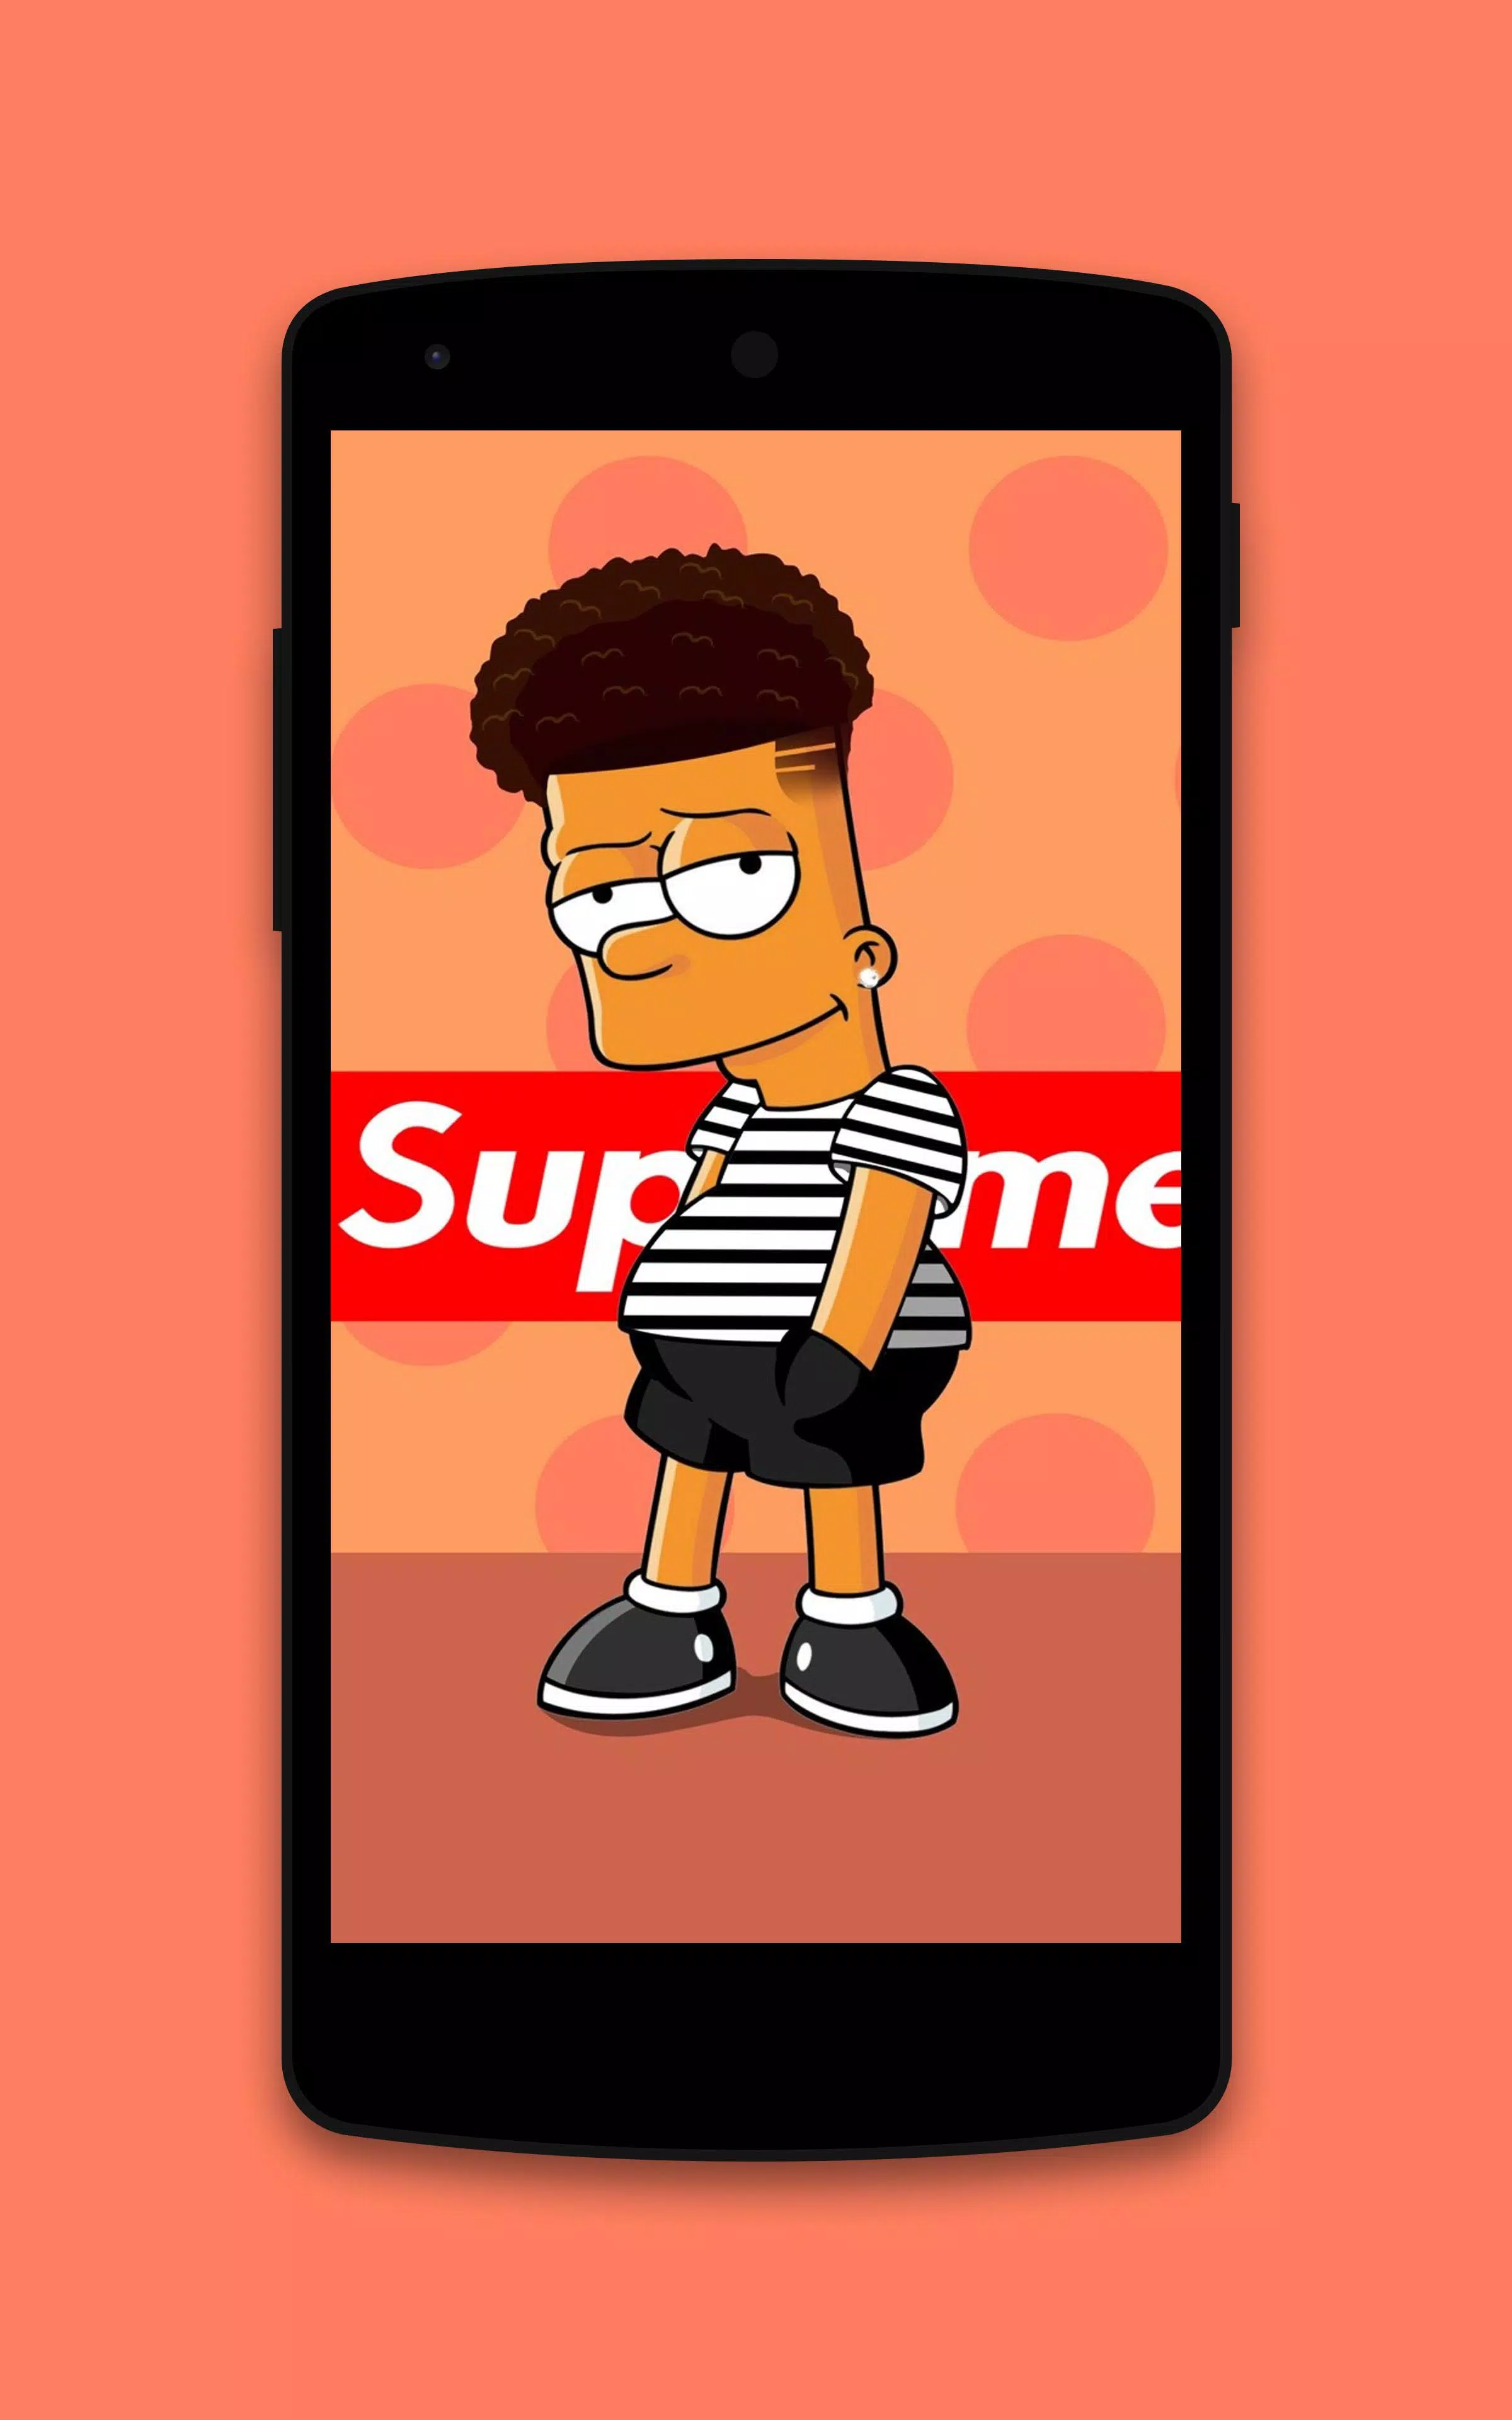 Supreme X Bart Simpson Wallpaper HD for Android - APK Download